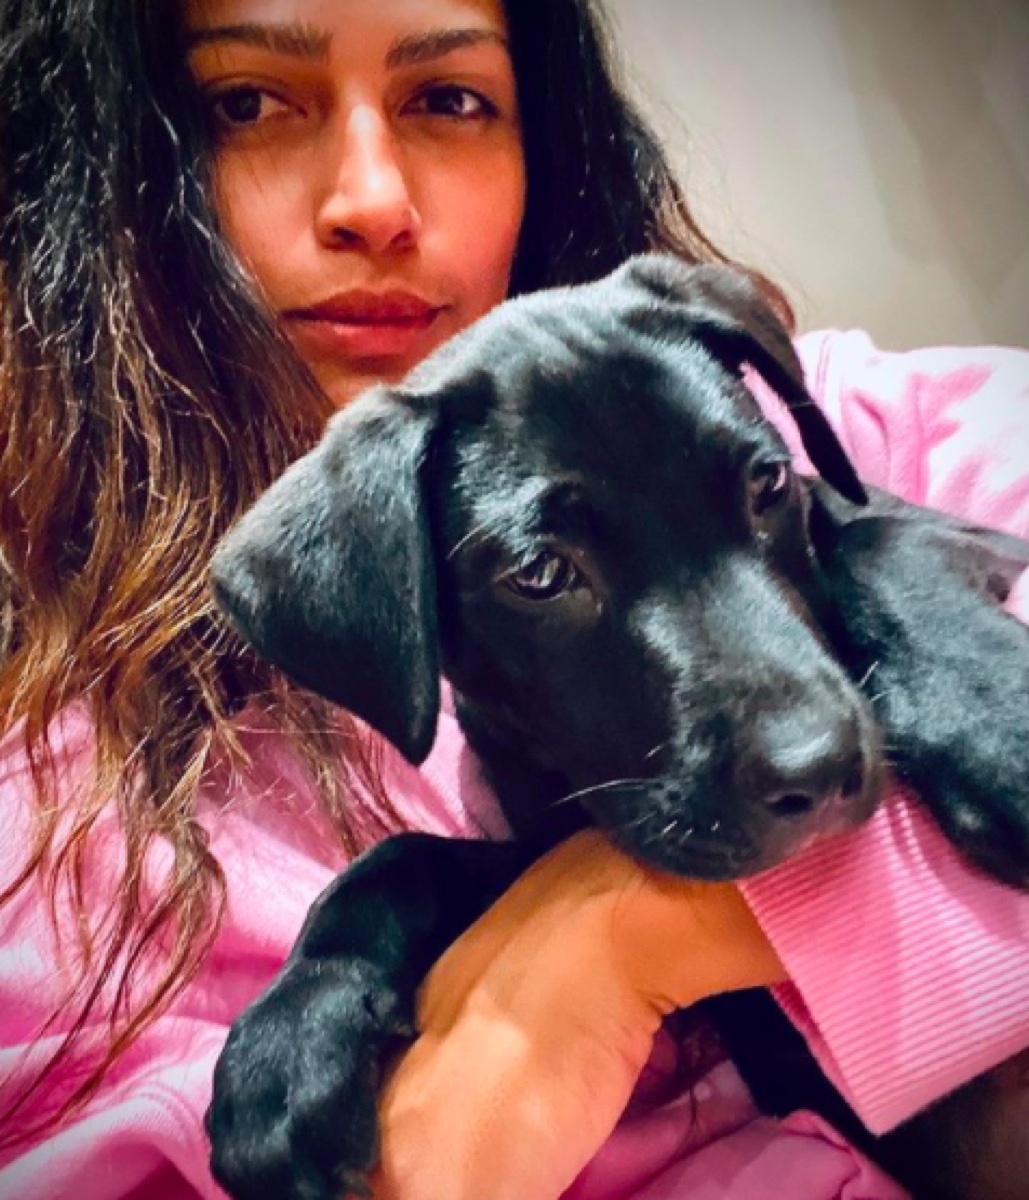 Camila Alves with adopted puppy on Instagram